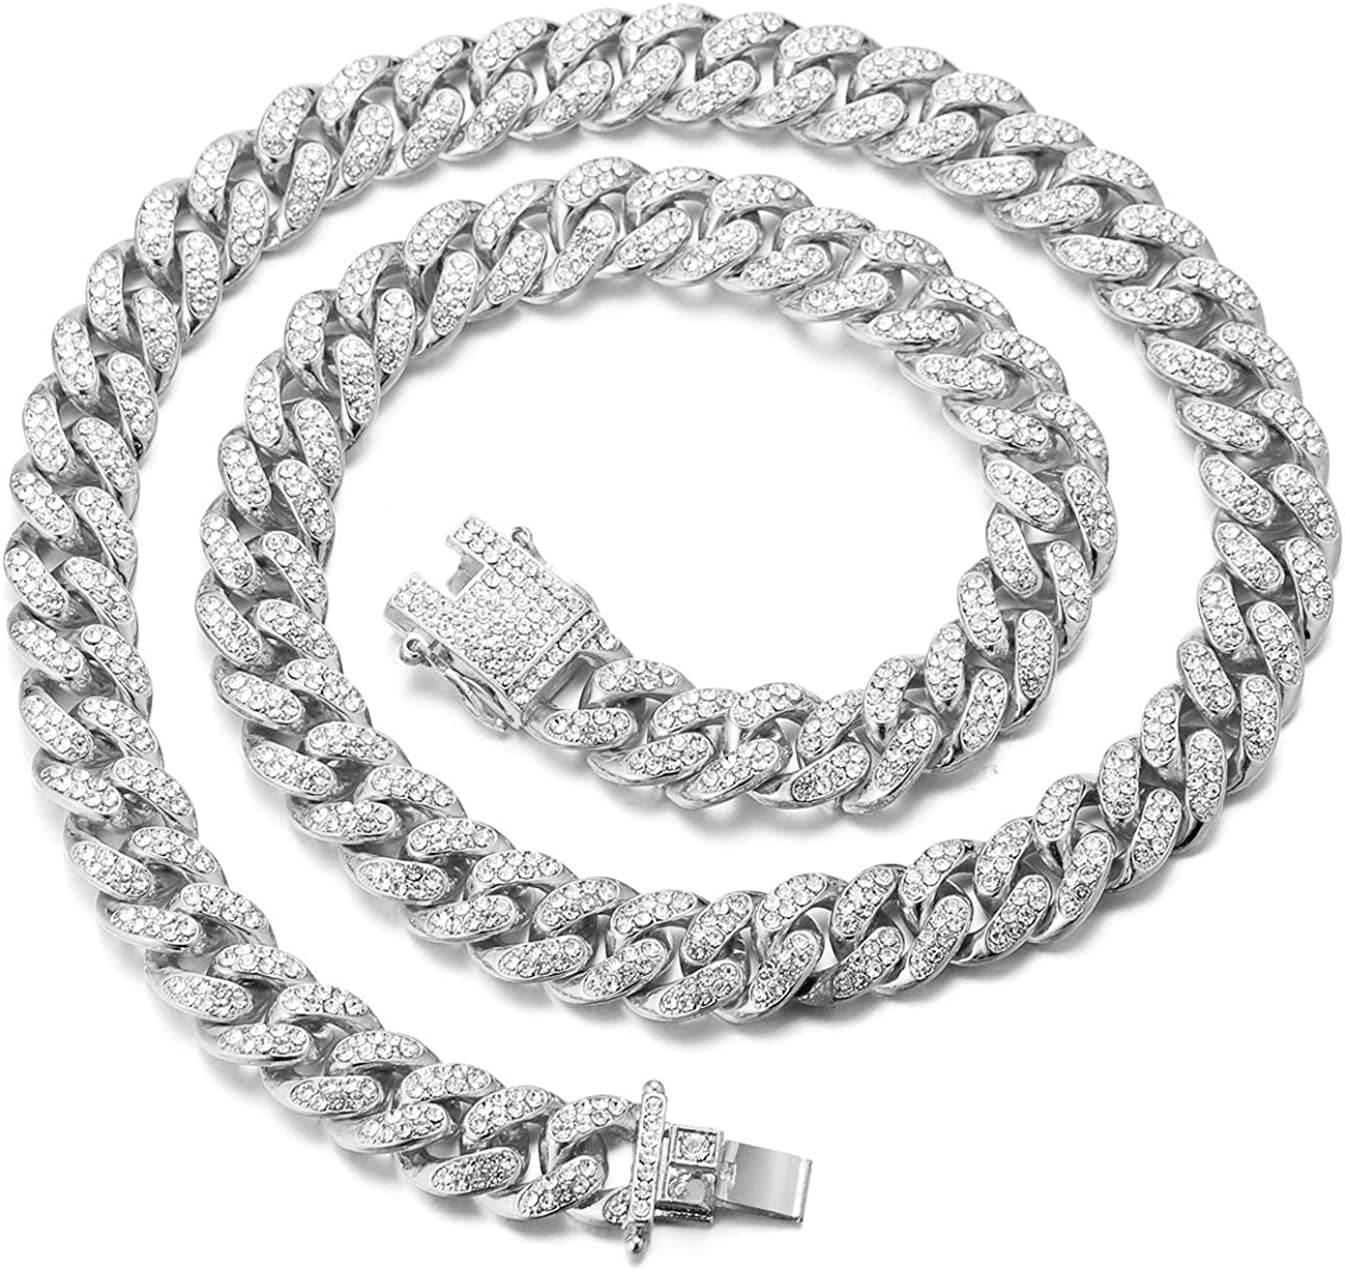 Men's Boy Stainless Steel 18K Gold Filled Curb Cuban Chain